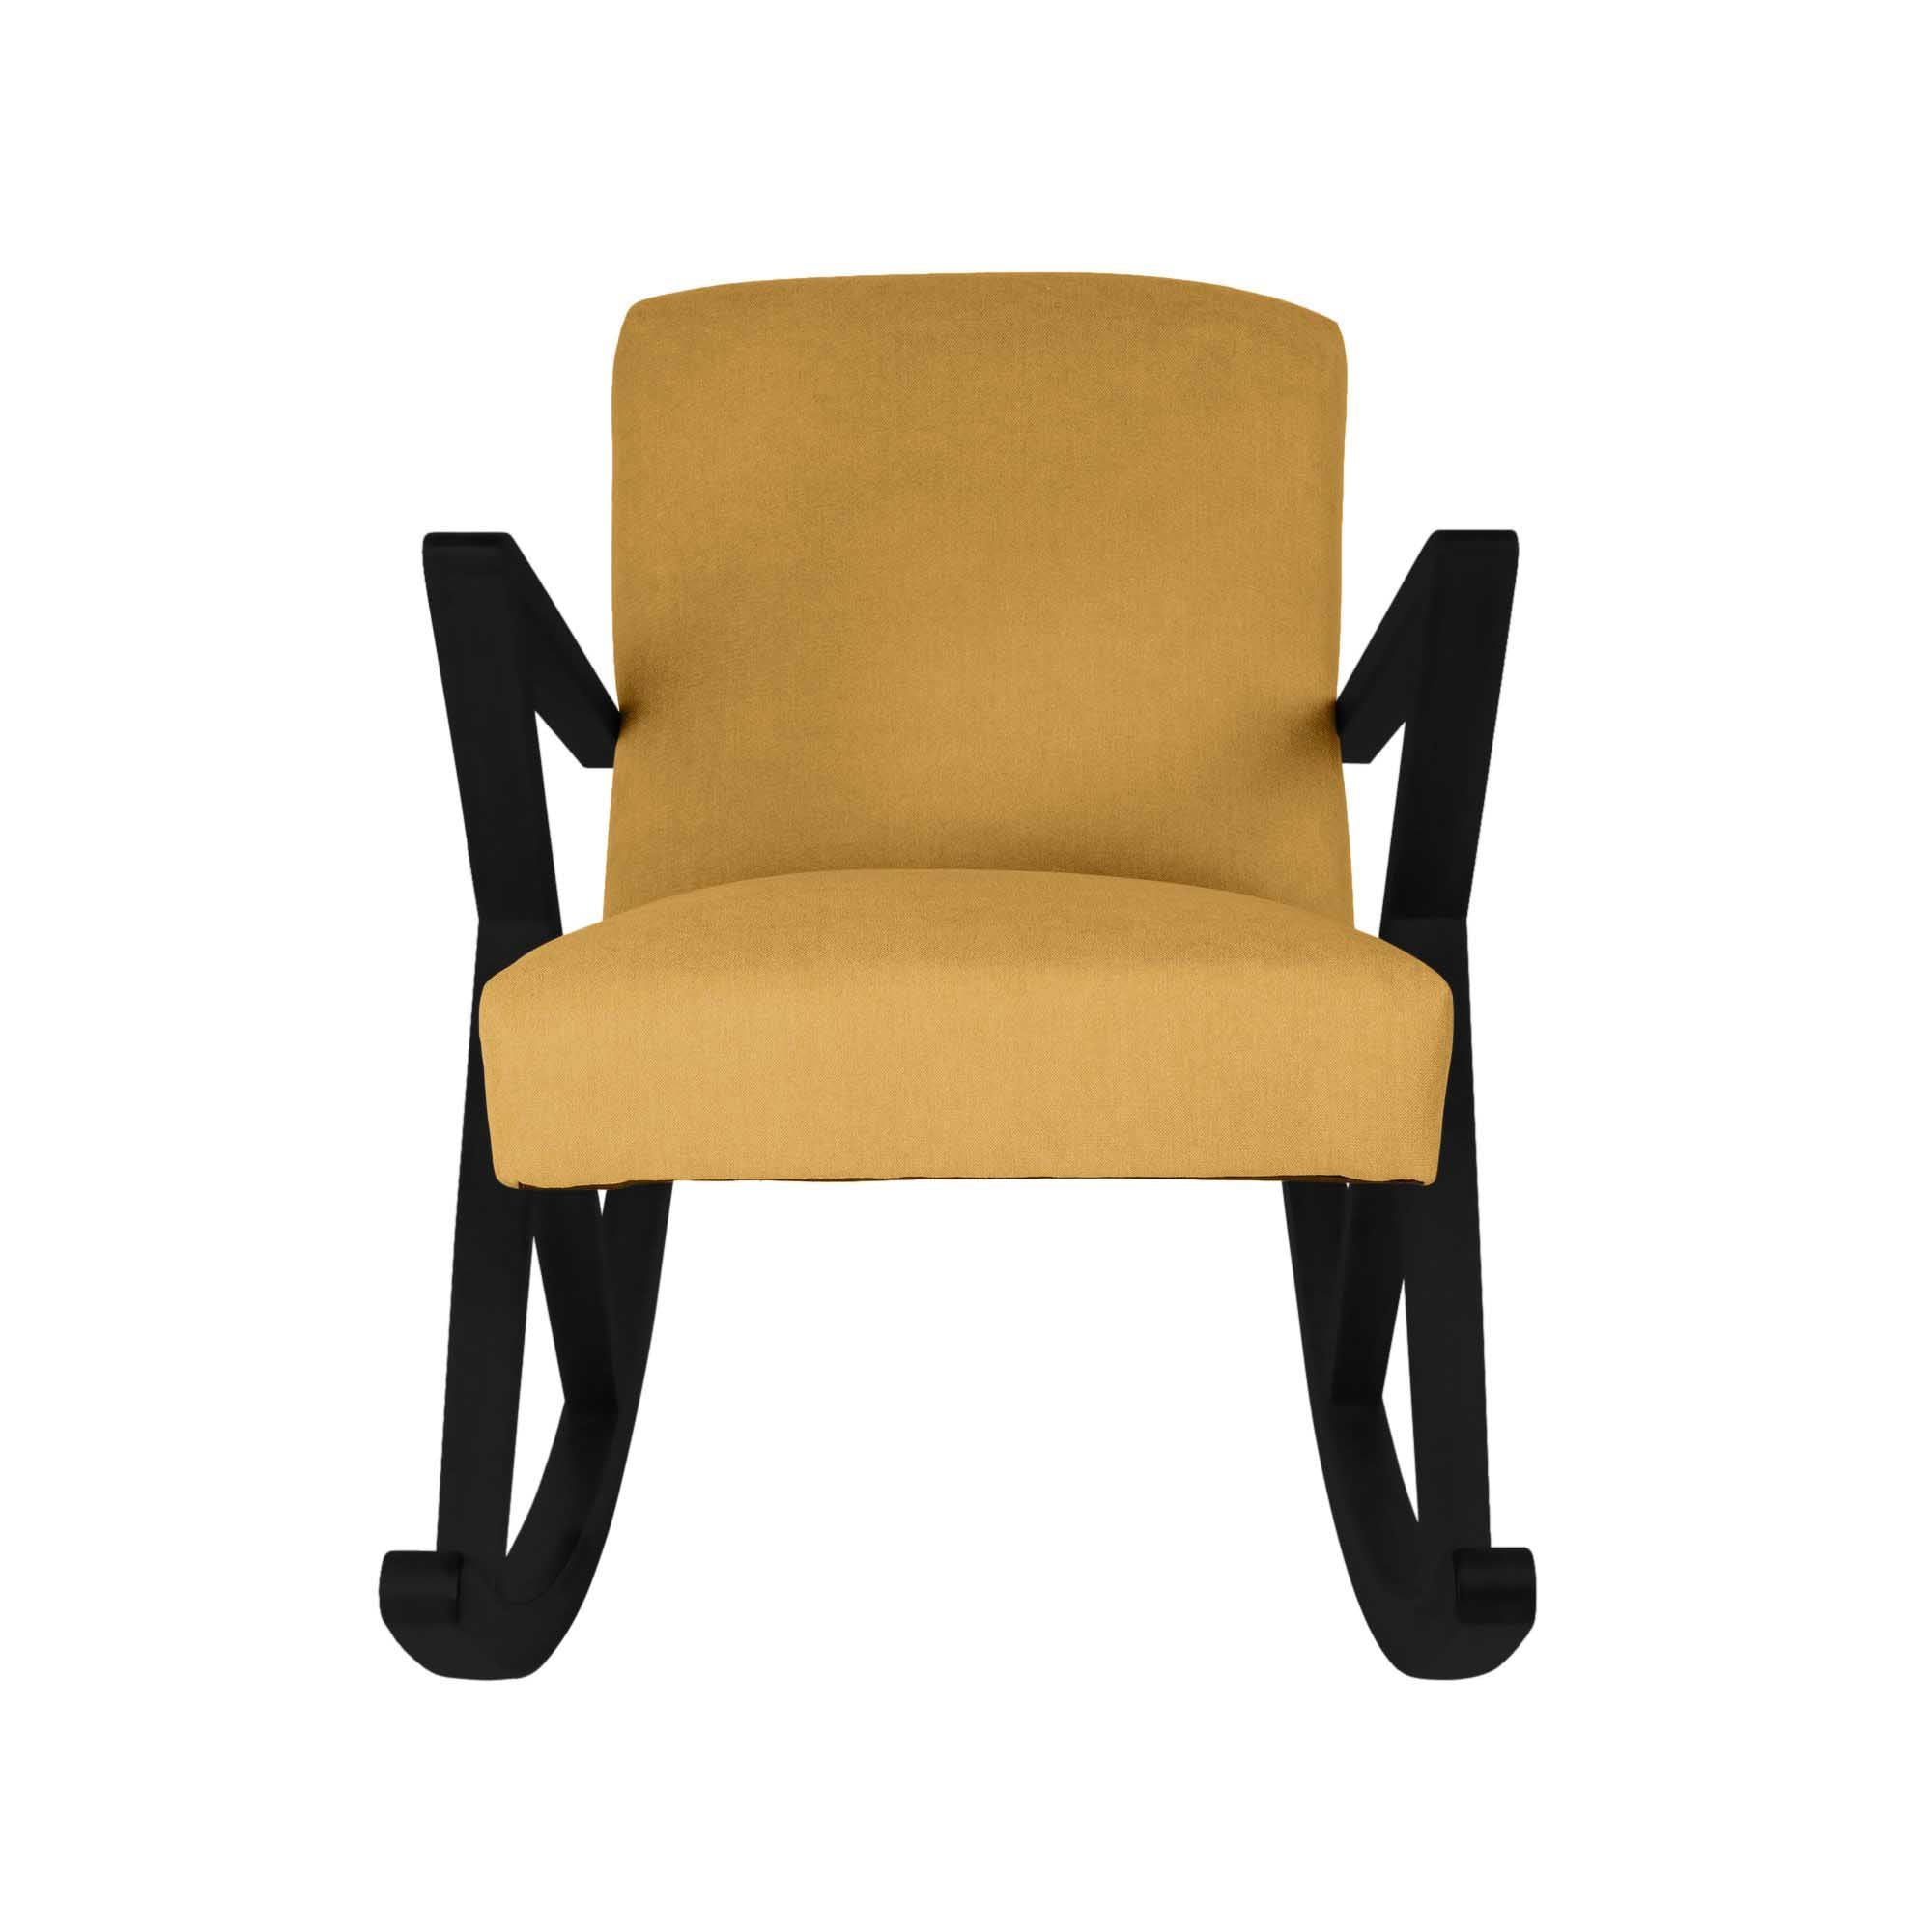 Rocking Chair, Beech Wood Frame, Black Lacquered yellow gabric, front view